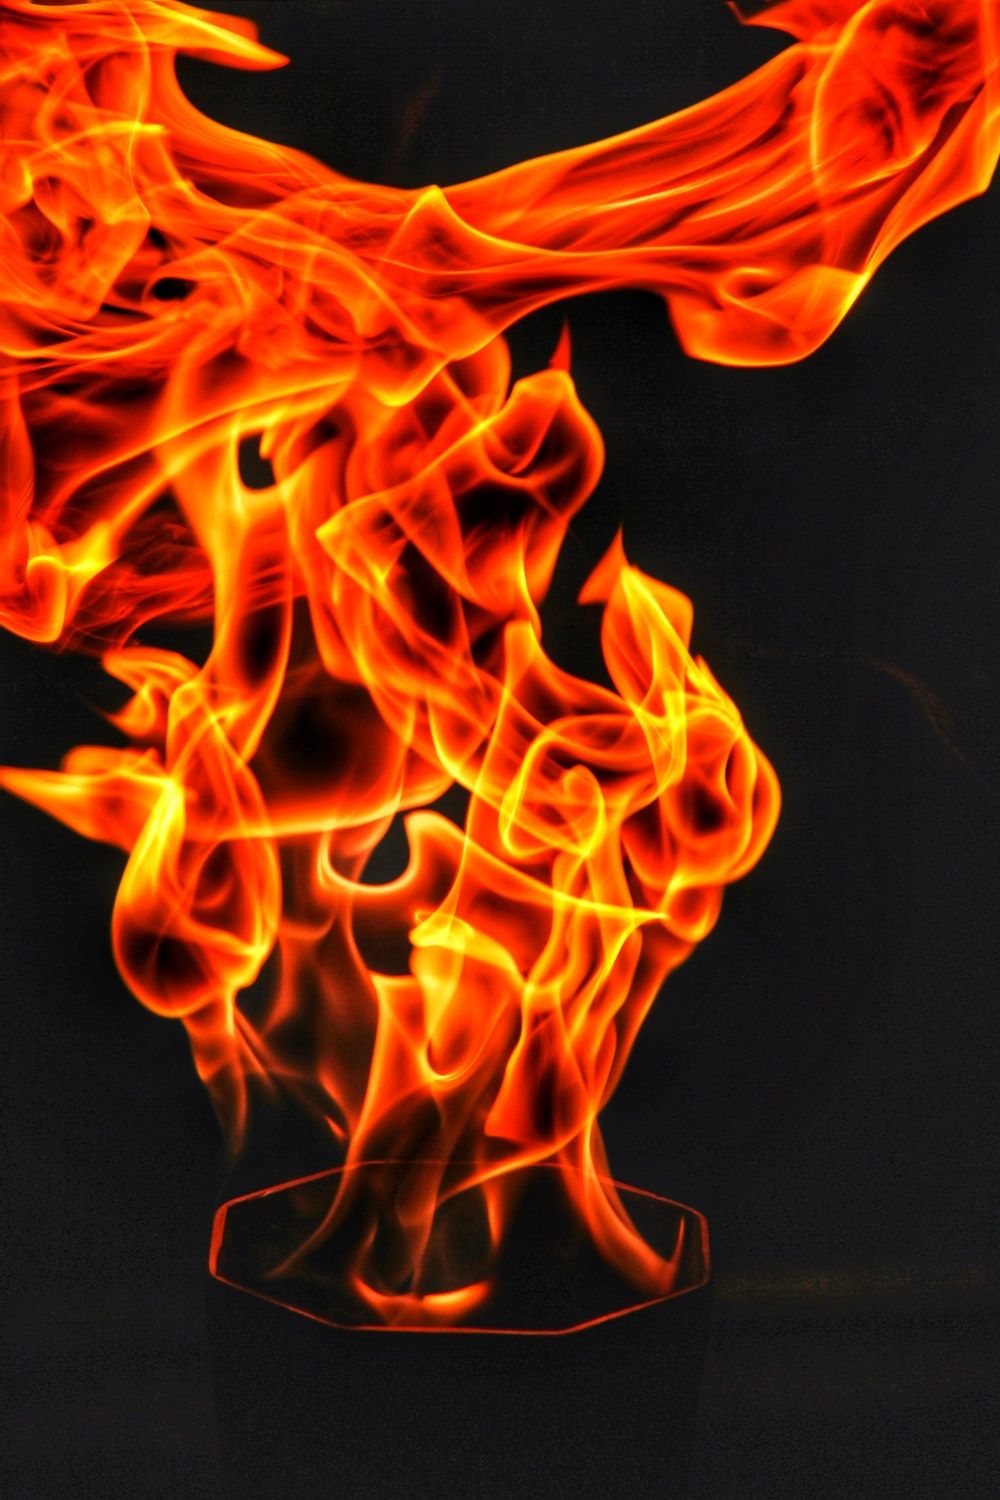 Red Fire Picture. Download Free Image